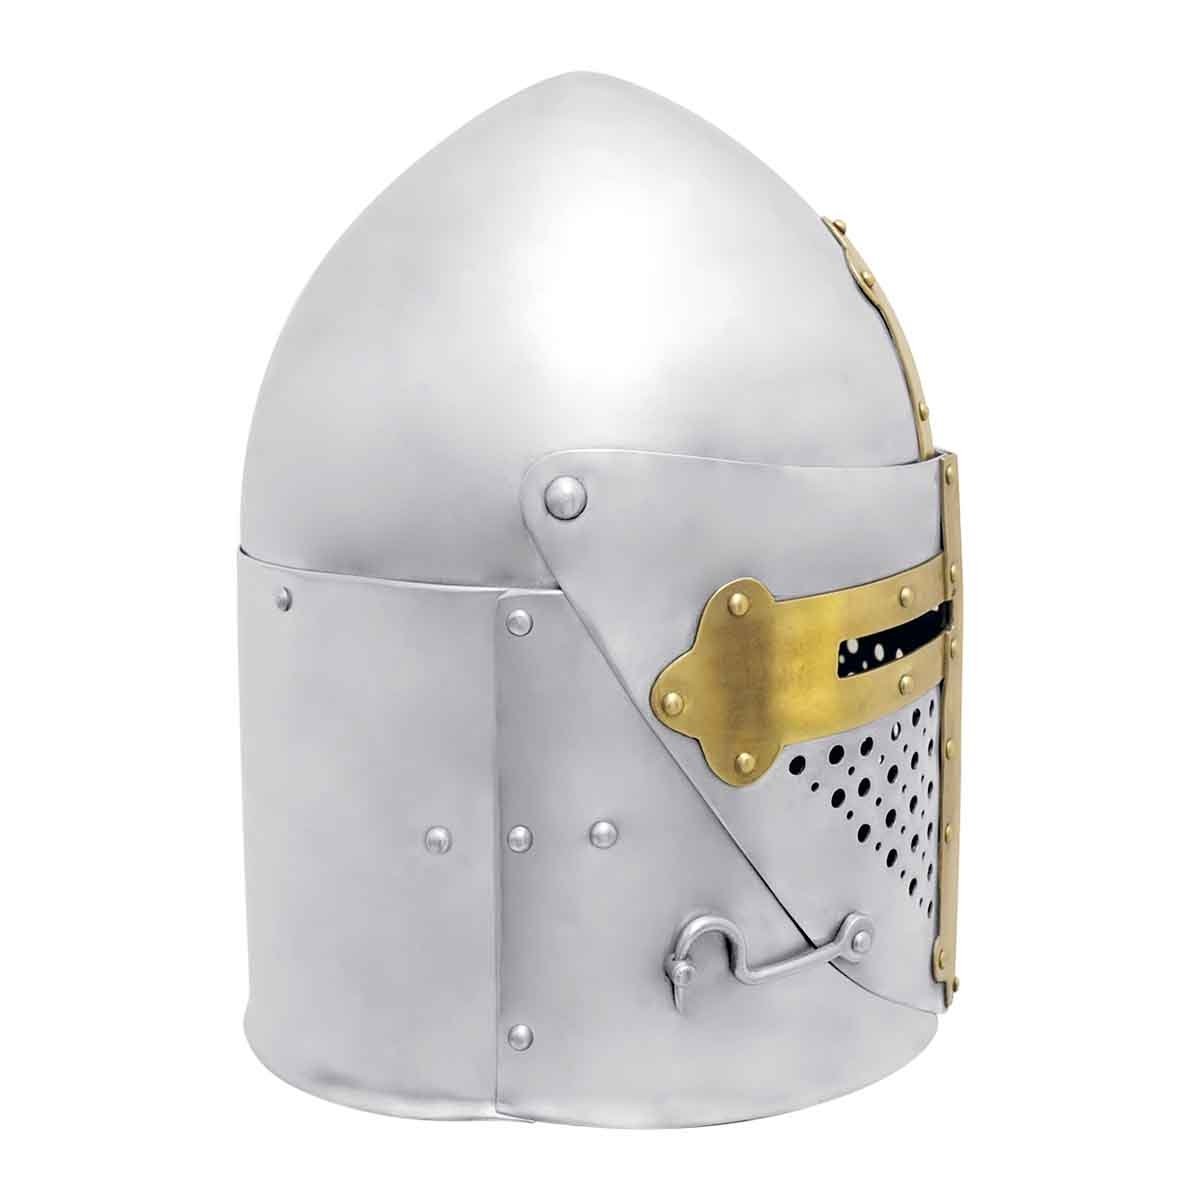 Sugar Loaf helmet with Movable visor and lock, Size M